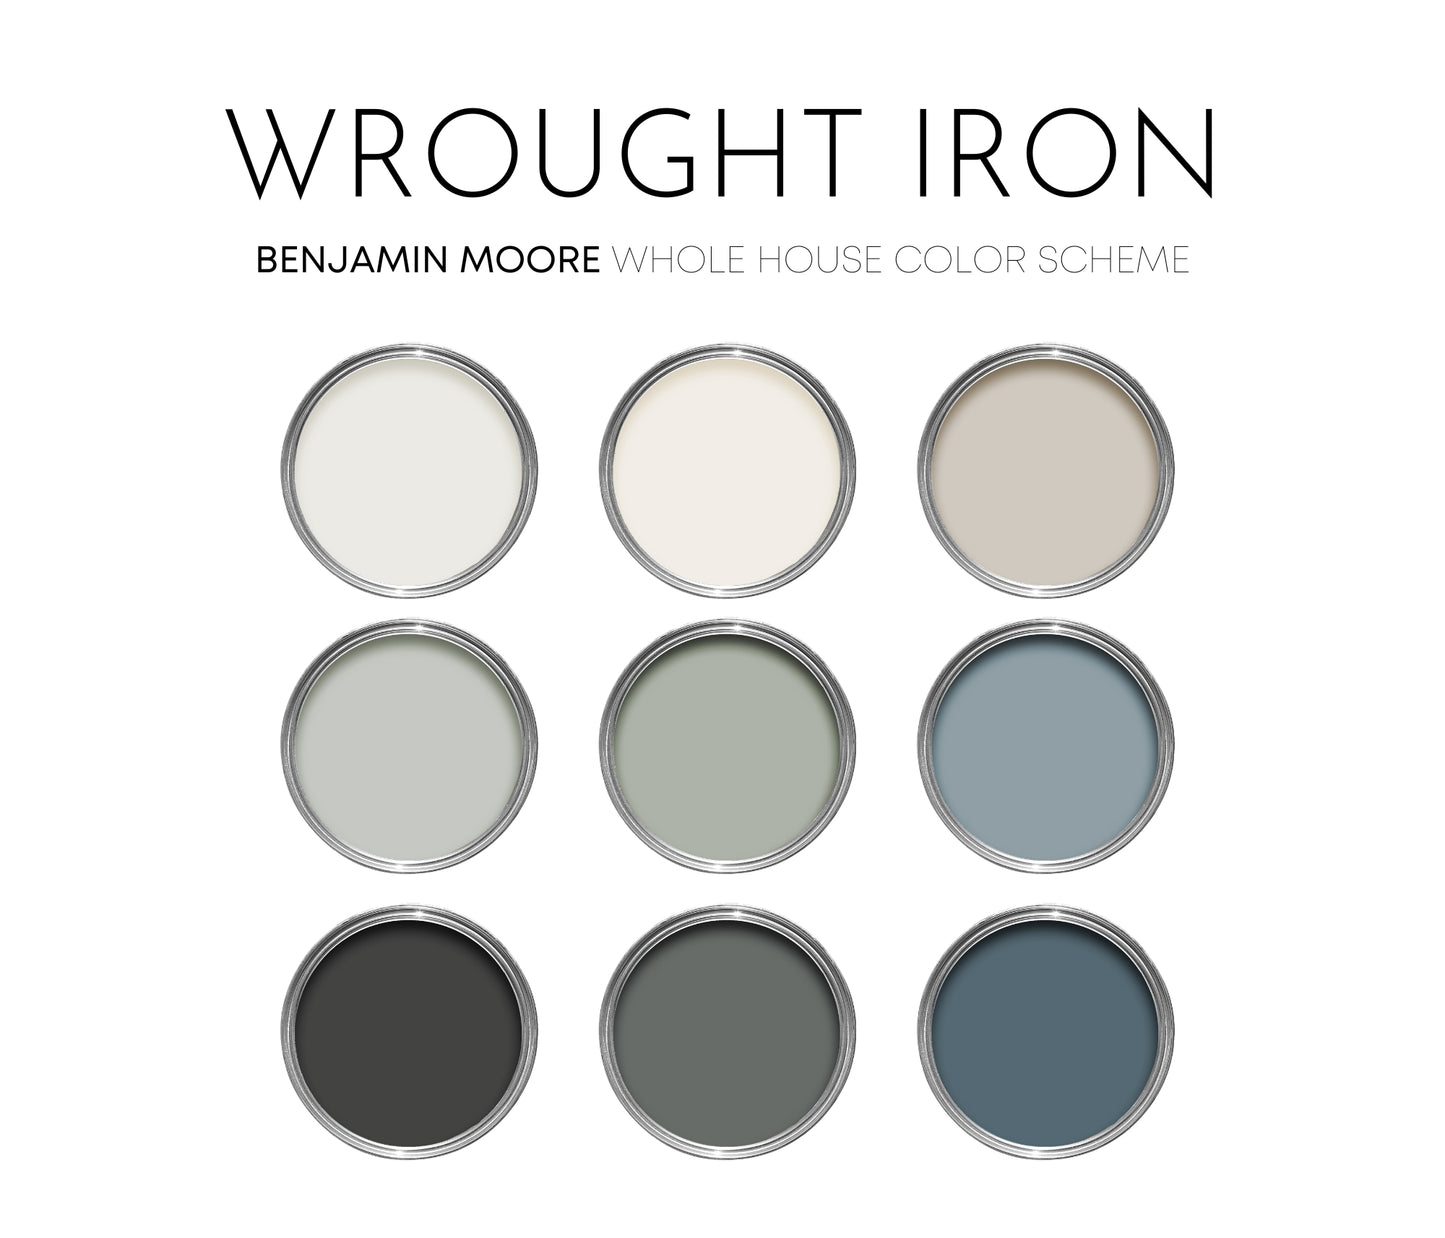 Wrought Iron Benjamin Moore Paint Palette, Modern Neutral Interior Paint Colors, Wrought Iron Color Scheme, Wrought Iron Compliments, Spellbound